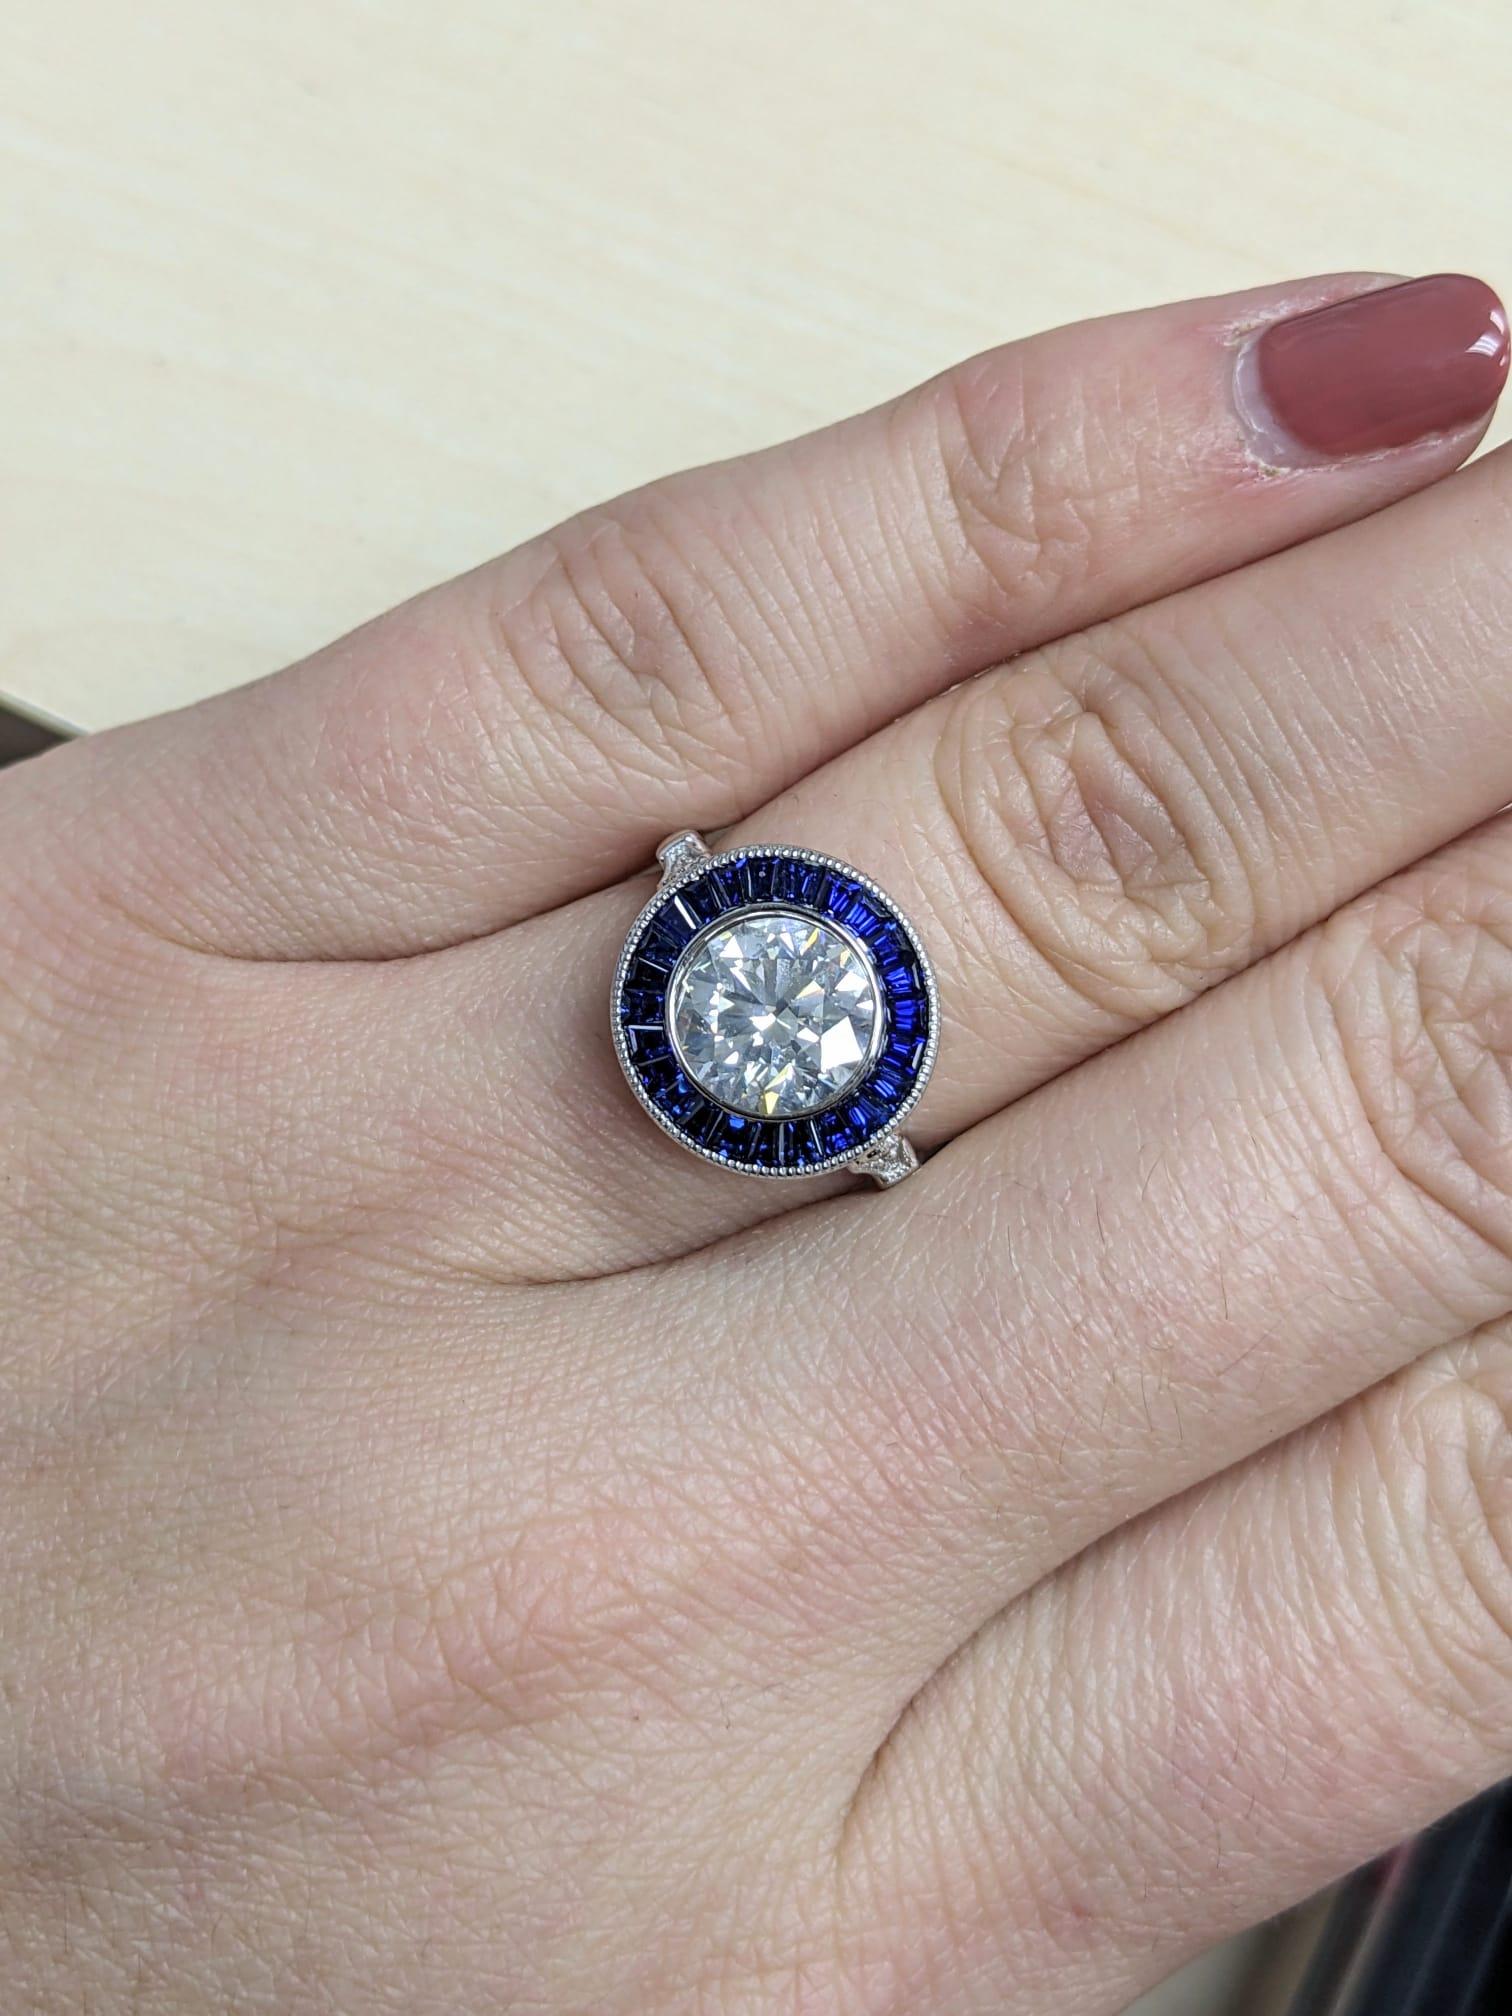 Art Deco style ring features a lively and substantial 2.20 diamond surrounded by a glamorous ring of royal blue natural sapphires. Certified by GIA with Excellent grades in all finishing categories, the diamond has fantastic brilliance! In a classic